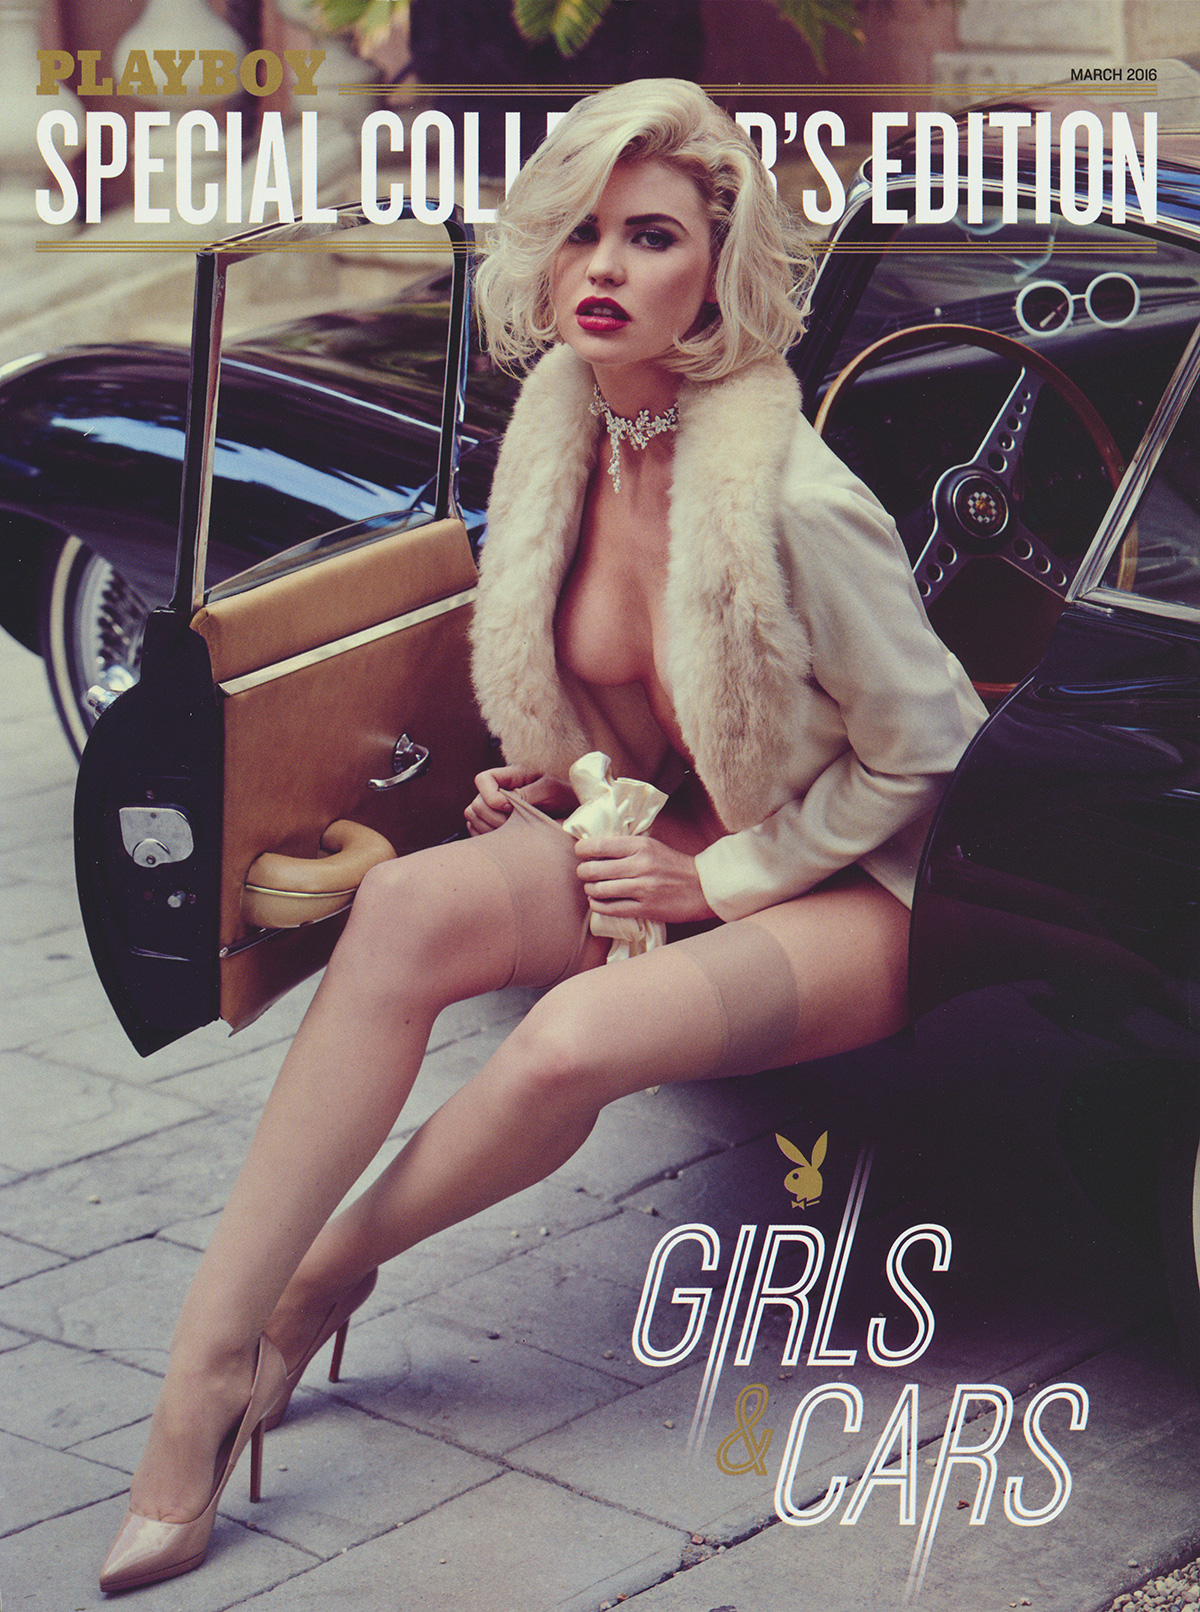 Playboy Special Collector's Edition March 2016 - Girls & Cars magazine back issue Playboy Special Collector's Edition magizine back copy 